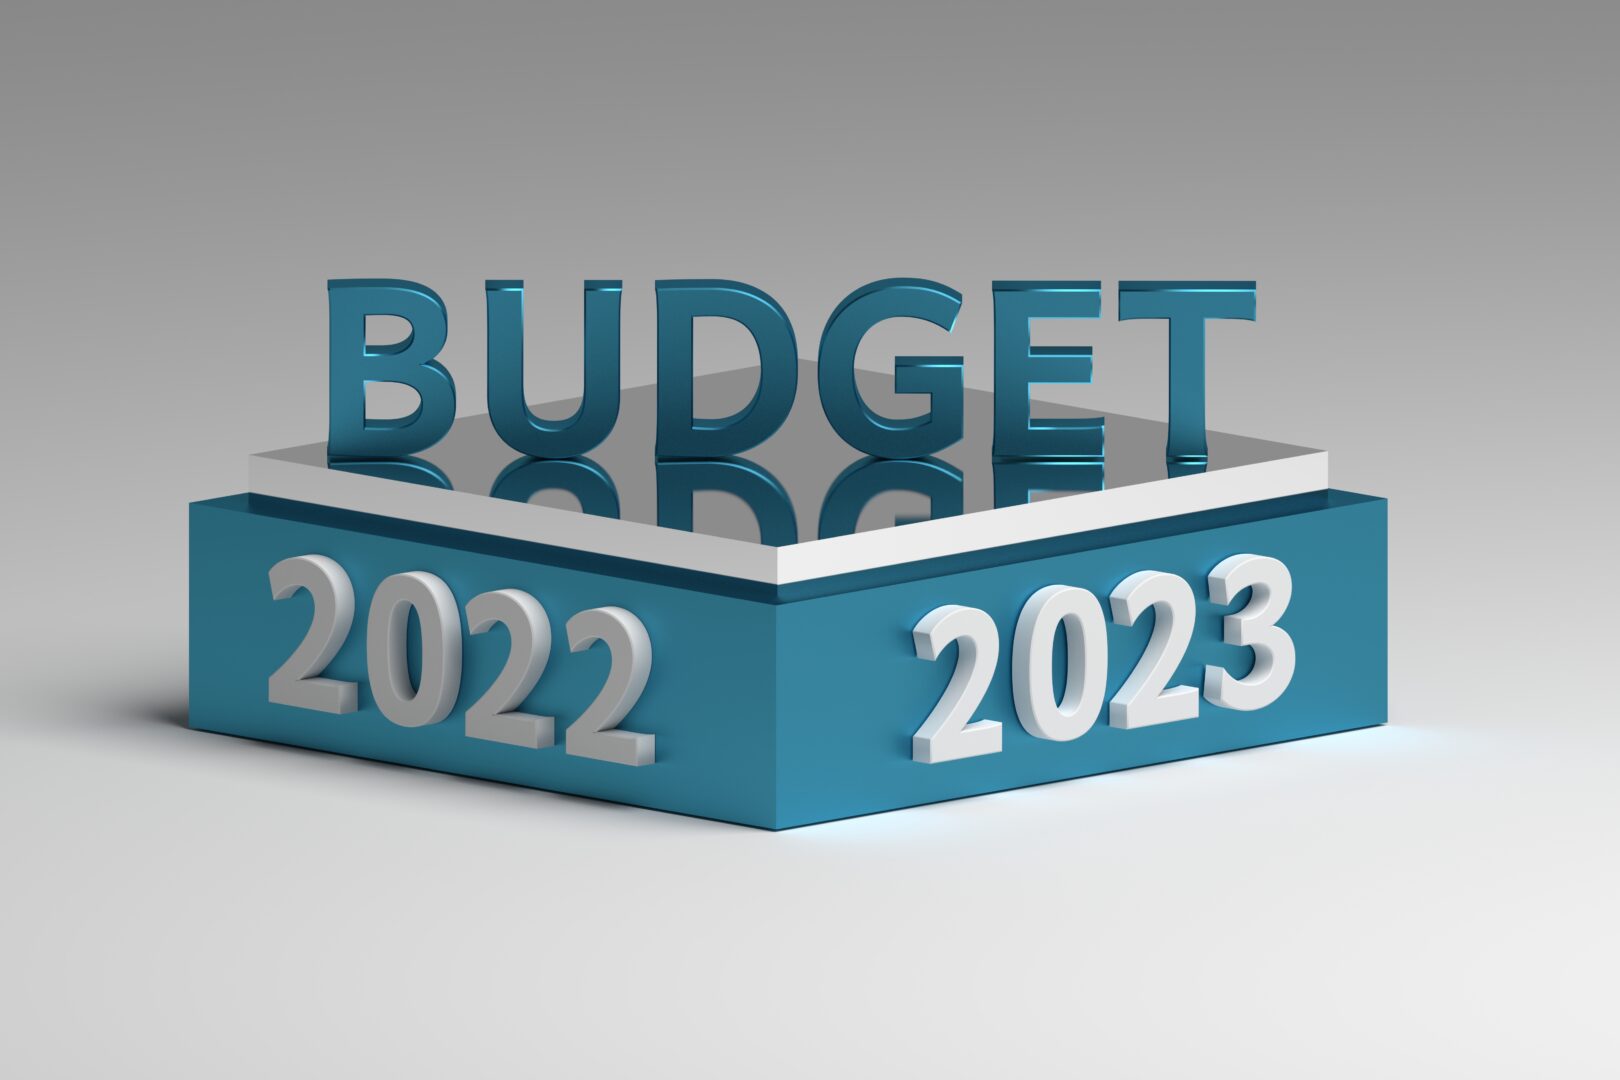 Key points from the 2022-2023 Federal Budget